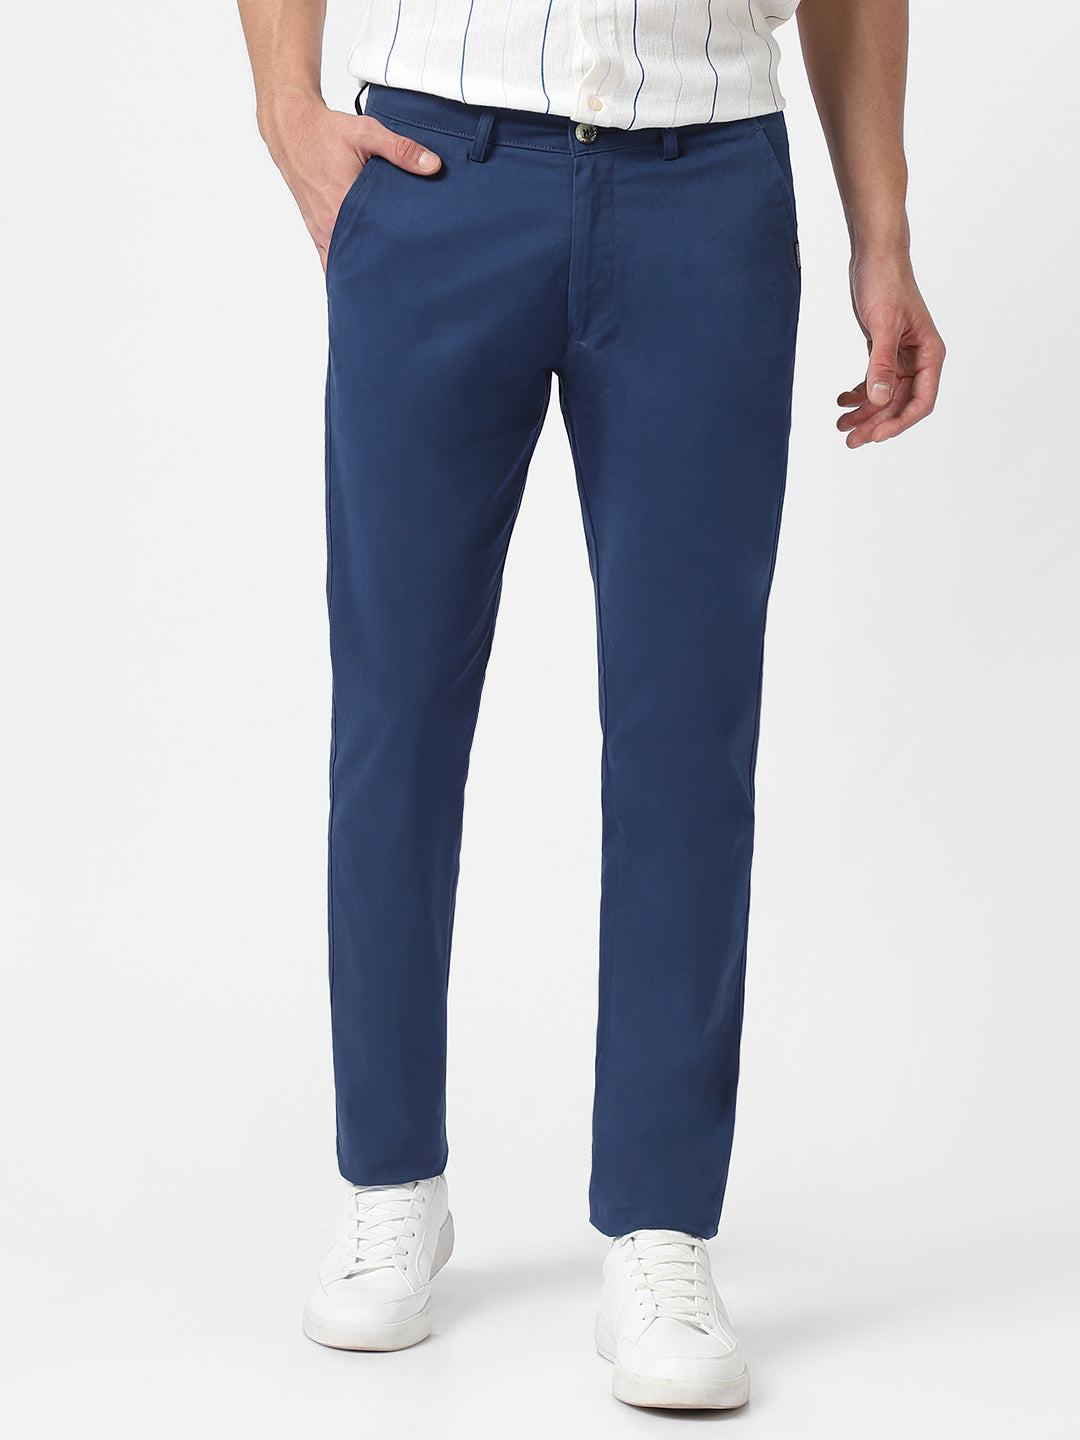 Men's Royal Blue Cotton Slim Fit Casual Chinos Trousers Stretch